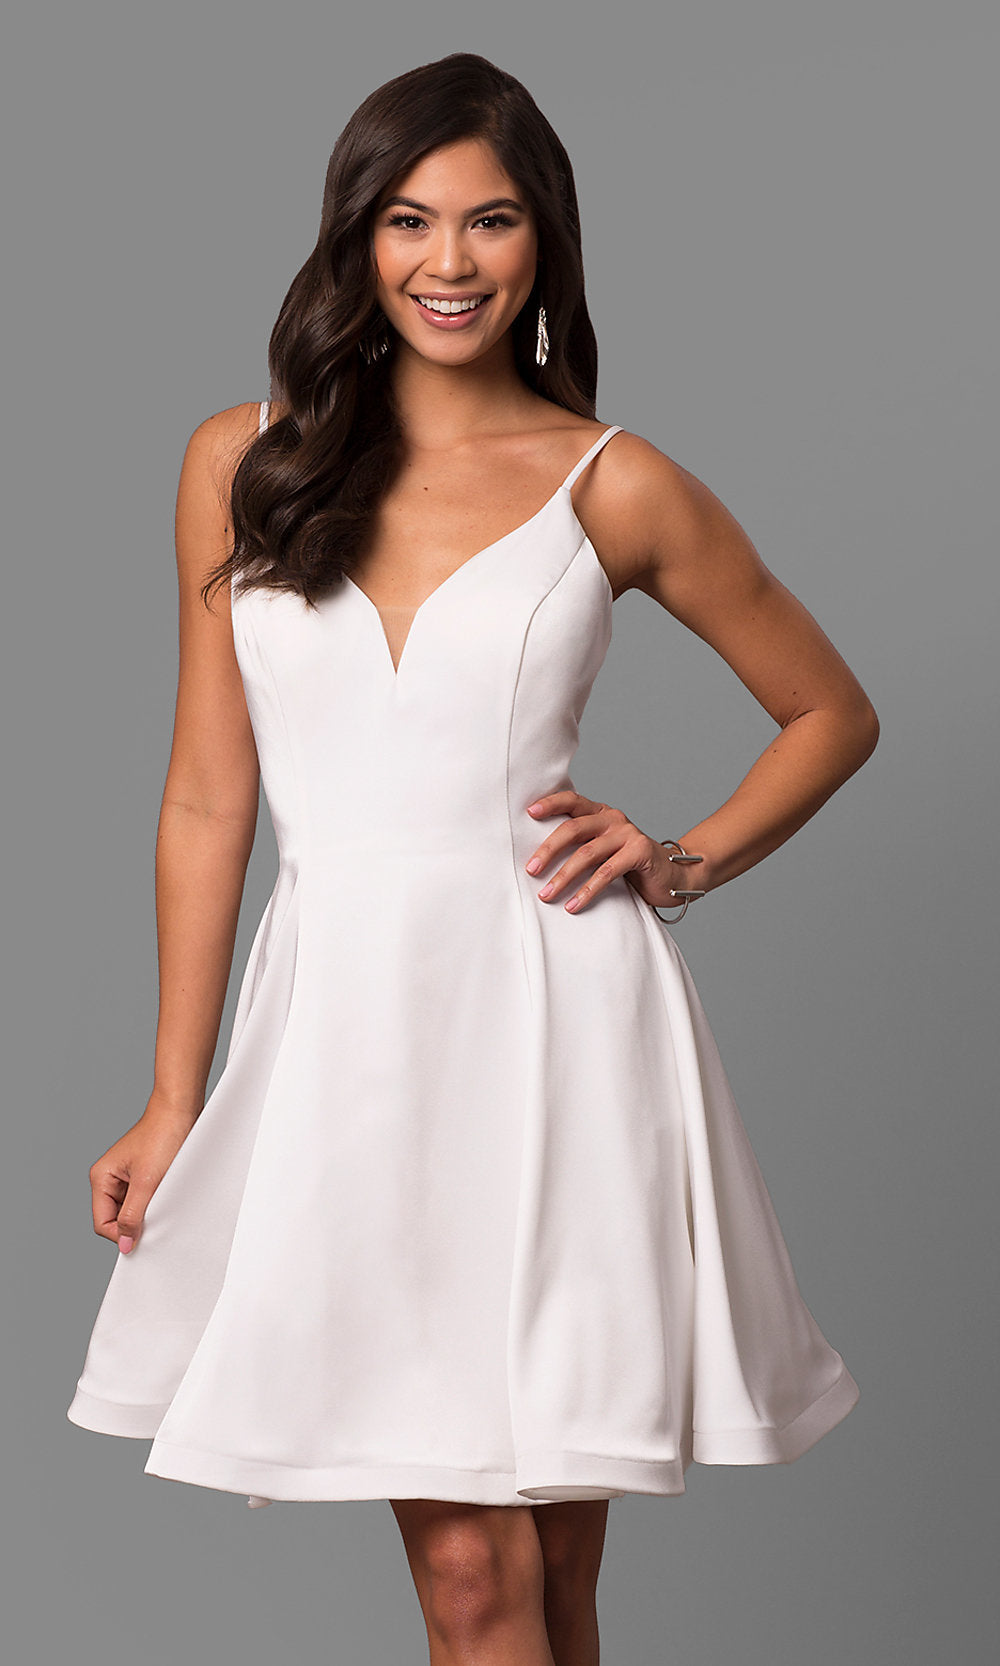 Ivory Short V-Neck A-Line Party Dress by Dave and Johnny